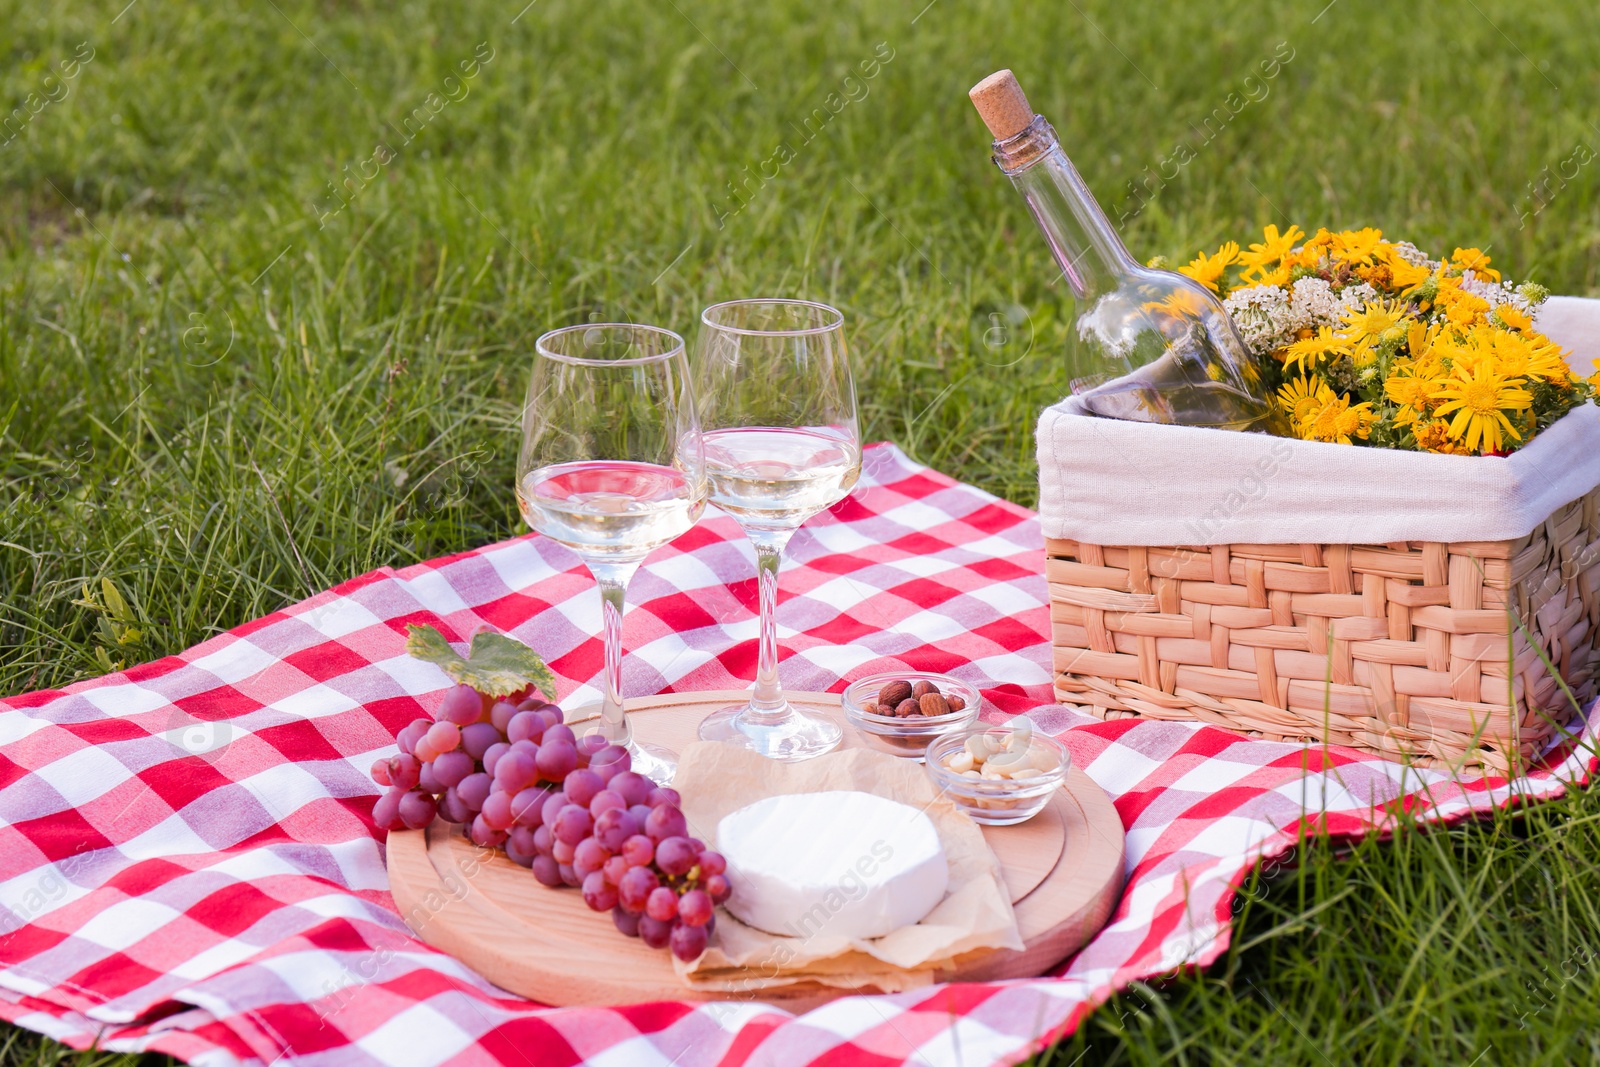 Photo of Glasses of white wine and snacks for picnic served on blanket outdoors